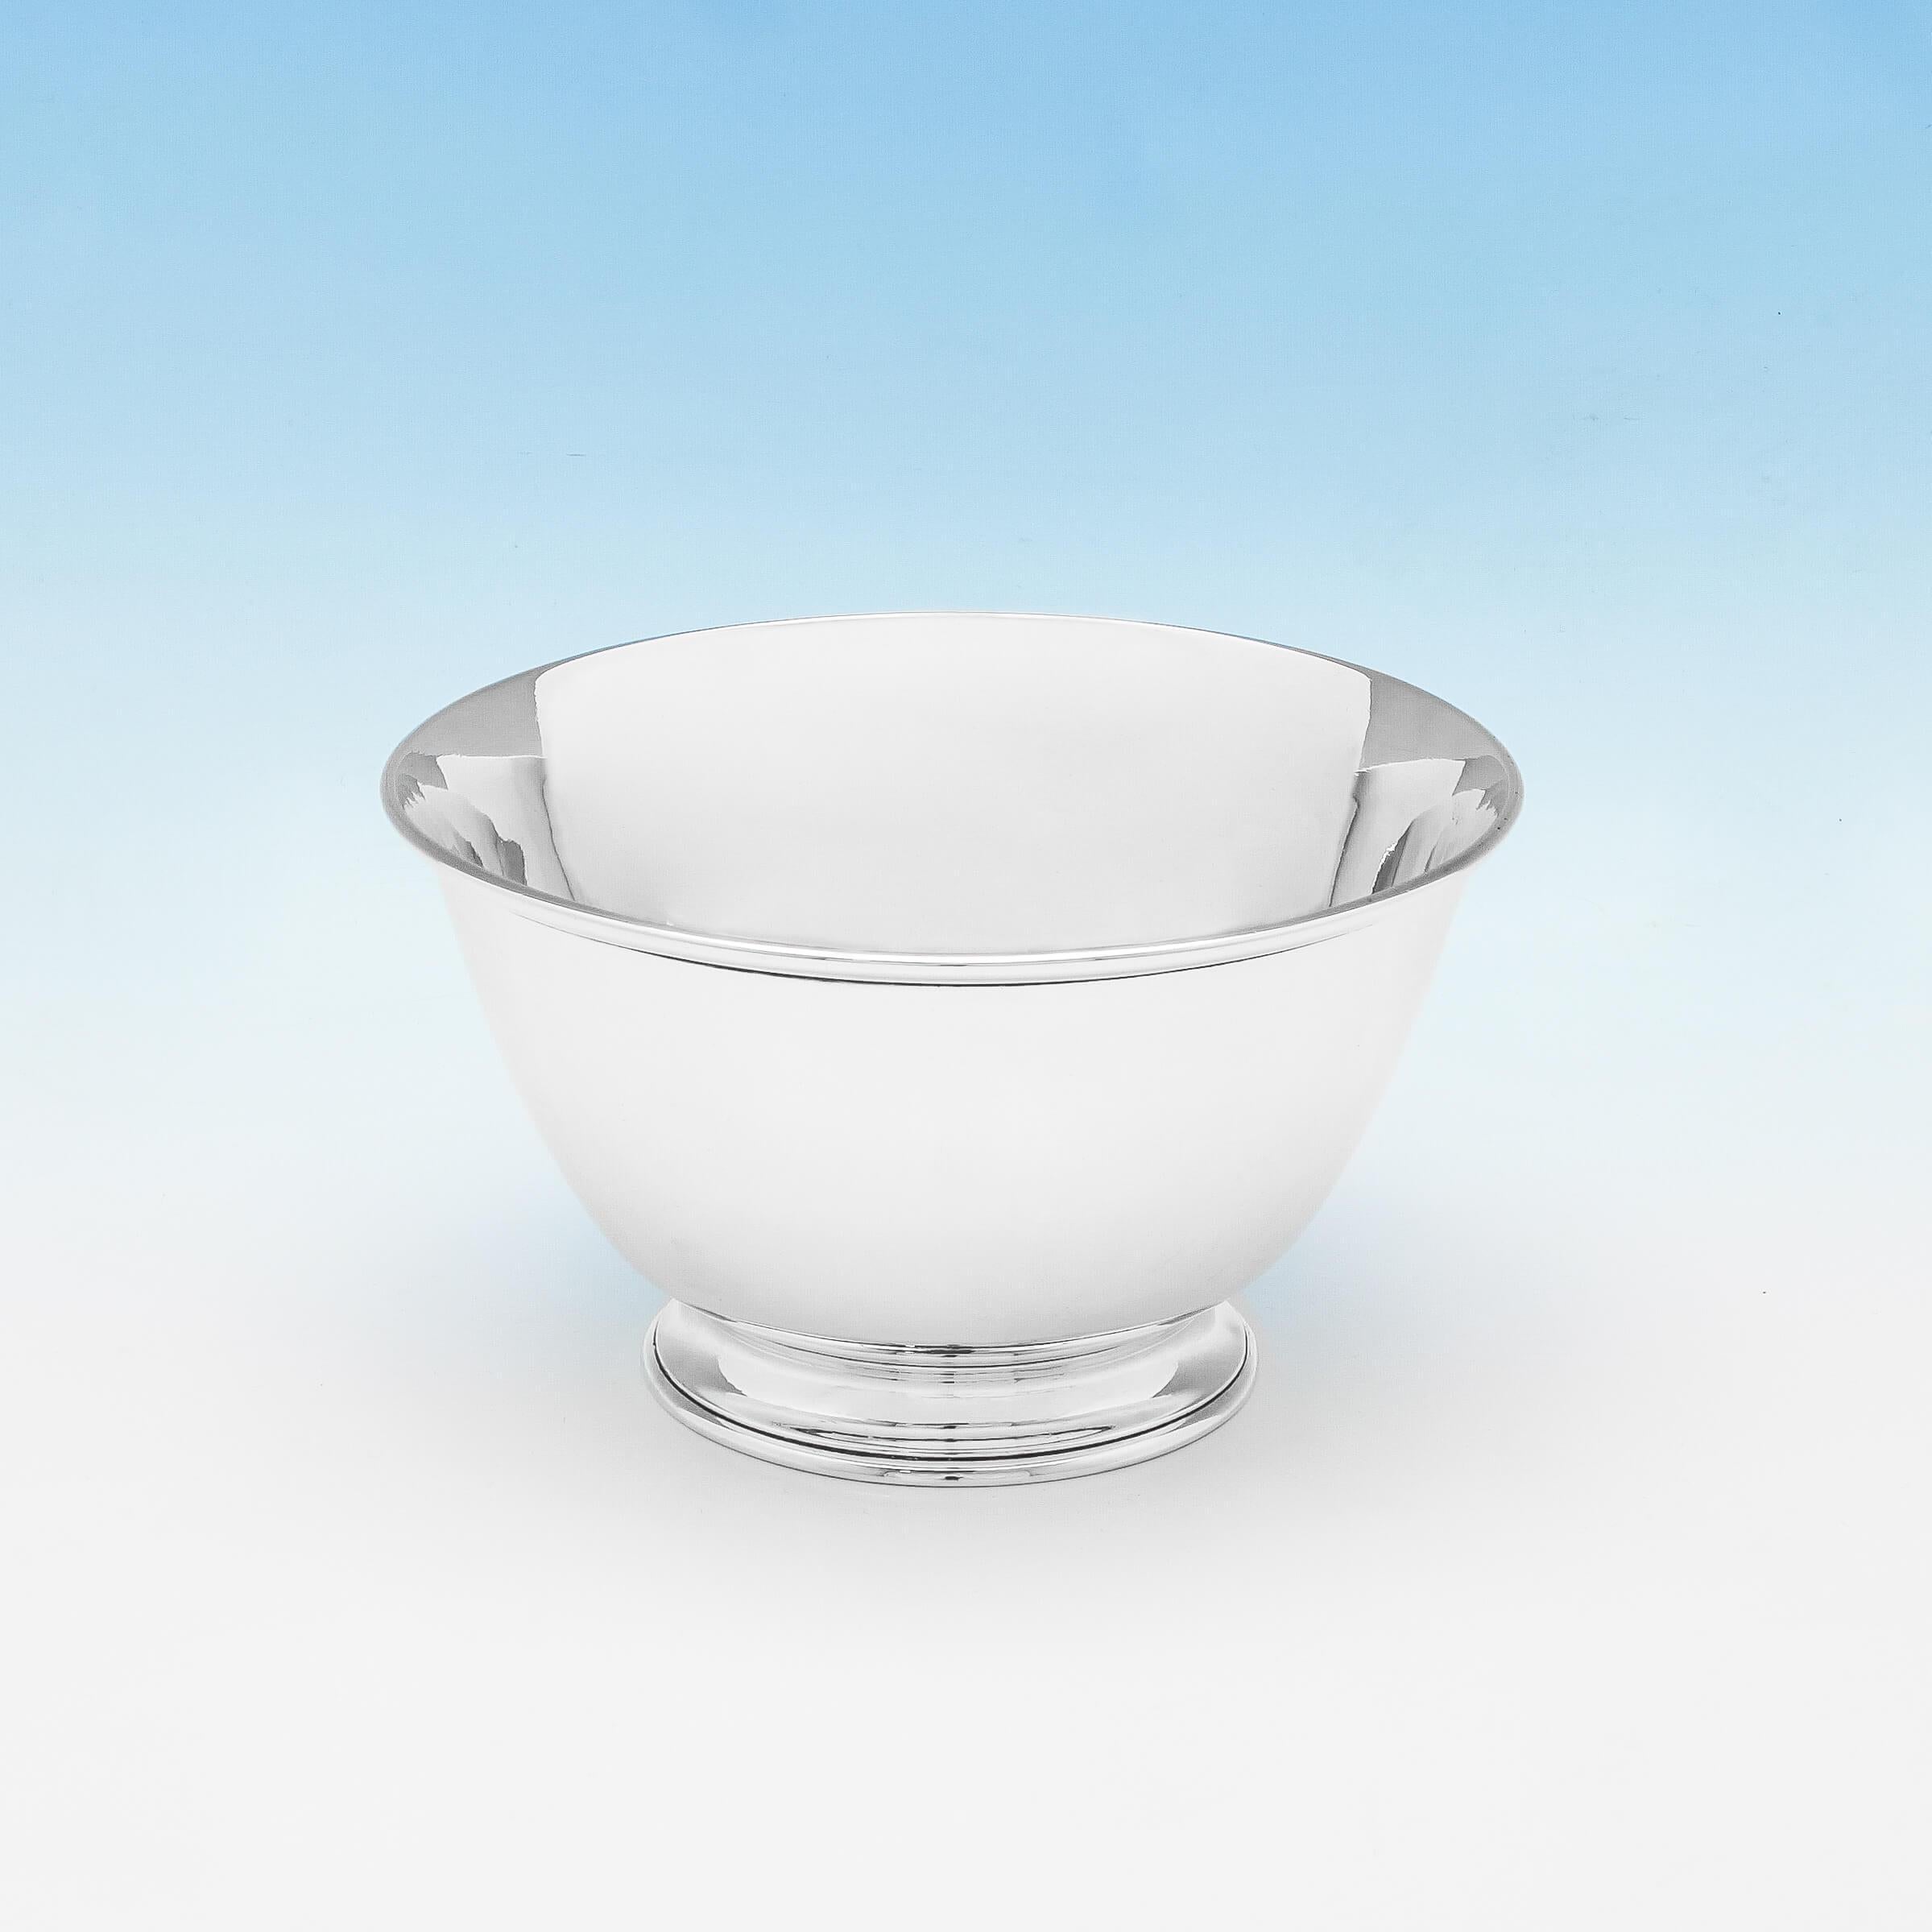 Hallmarked in London in 1847 by John Edwards, this elegant Antique, Victorian, Sterling Silver Bowl, is simple in form, standing on a pedestal base. The bowl measures 4